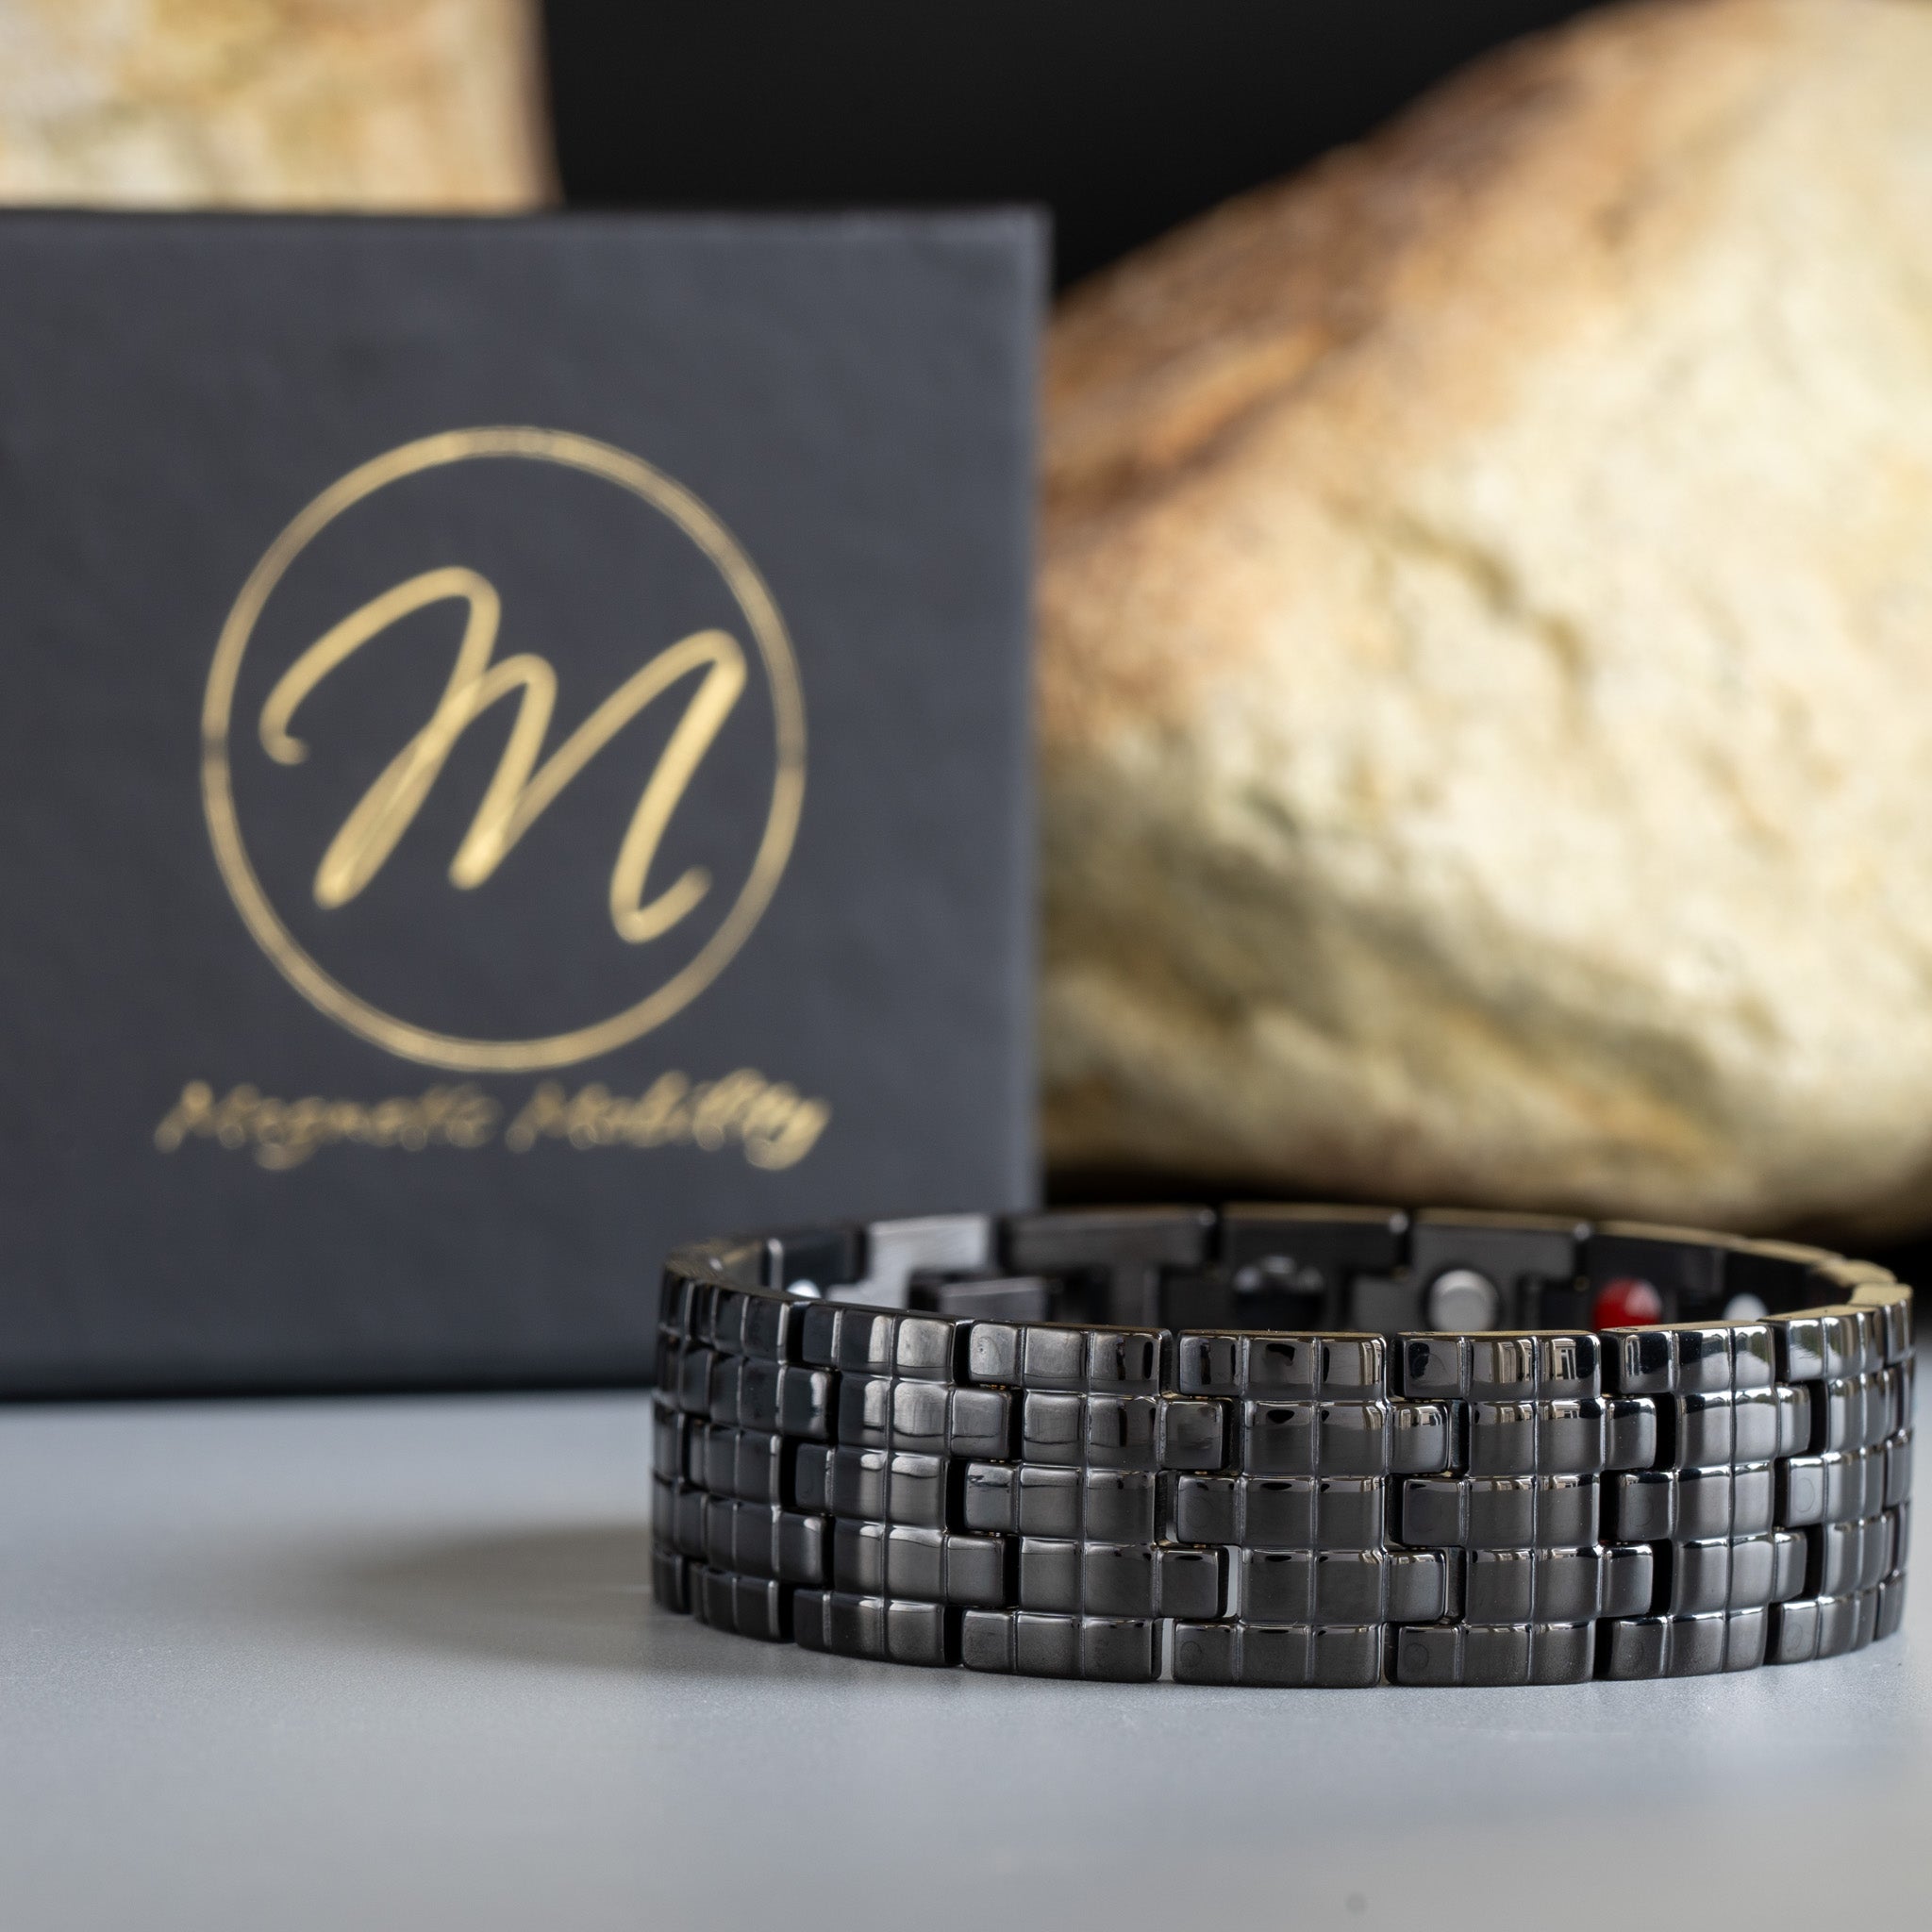 Far Infrared Ray Technology in 4in1 Magnetic Bracelets – Magnetic Mobility